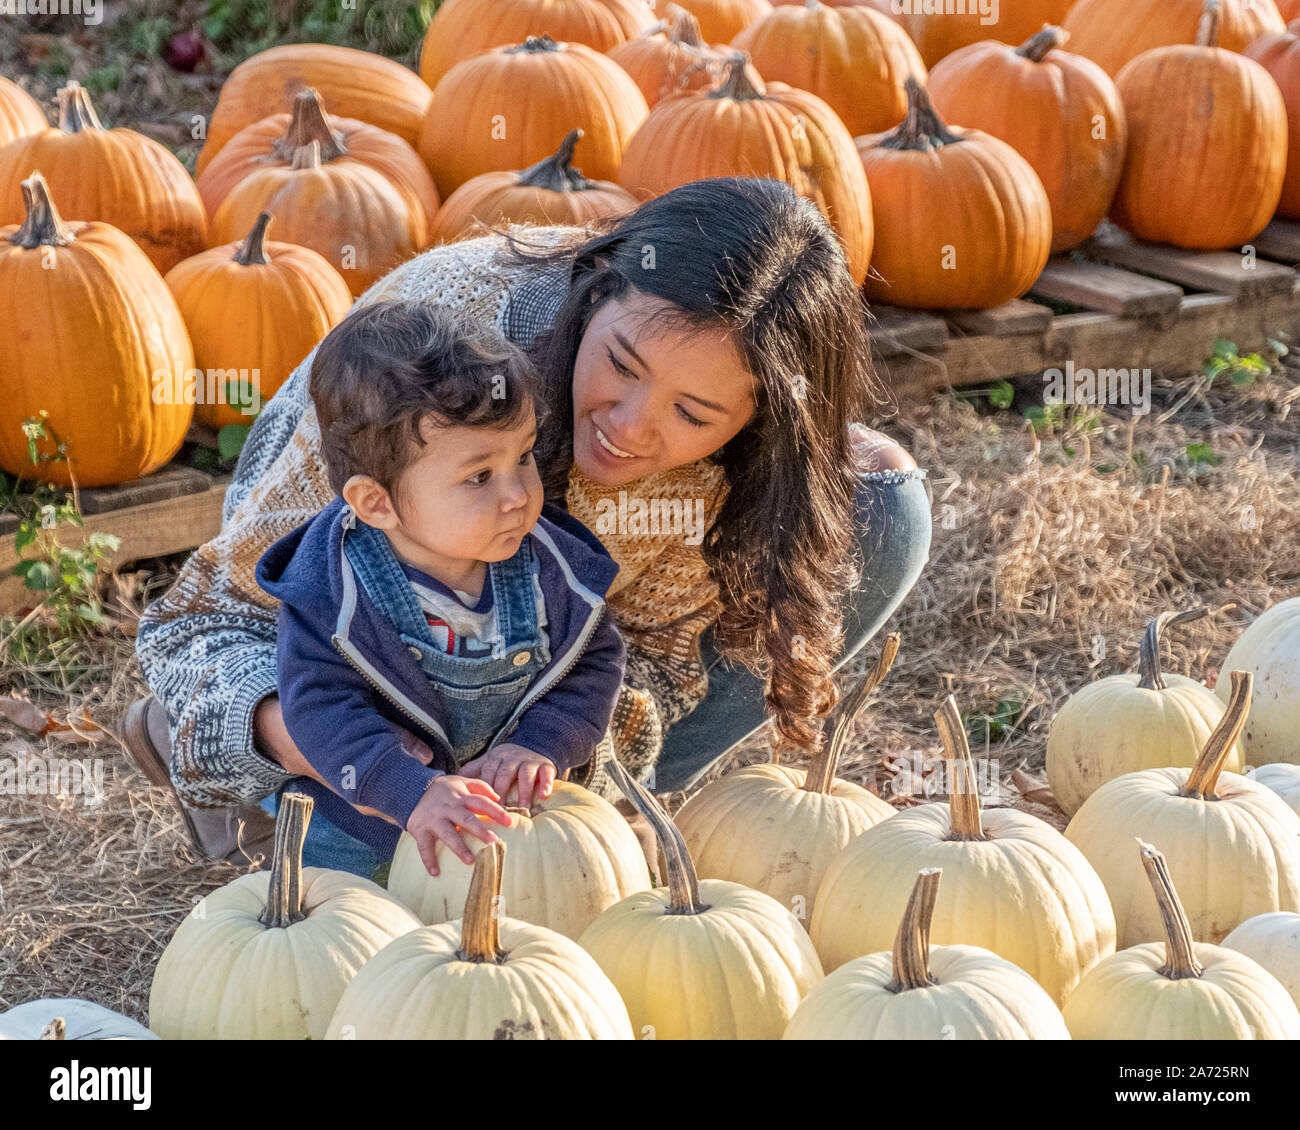 A Mom and her young son choosing a pumpkin Stock Photo